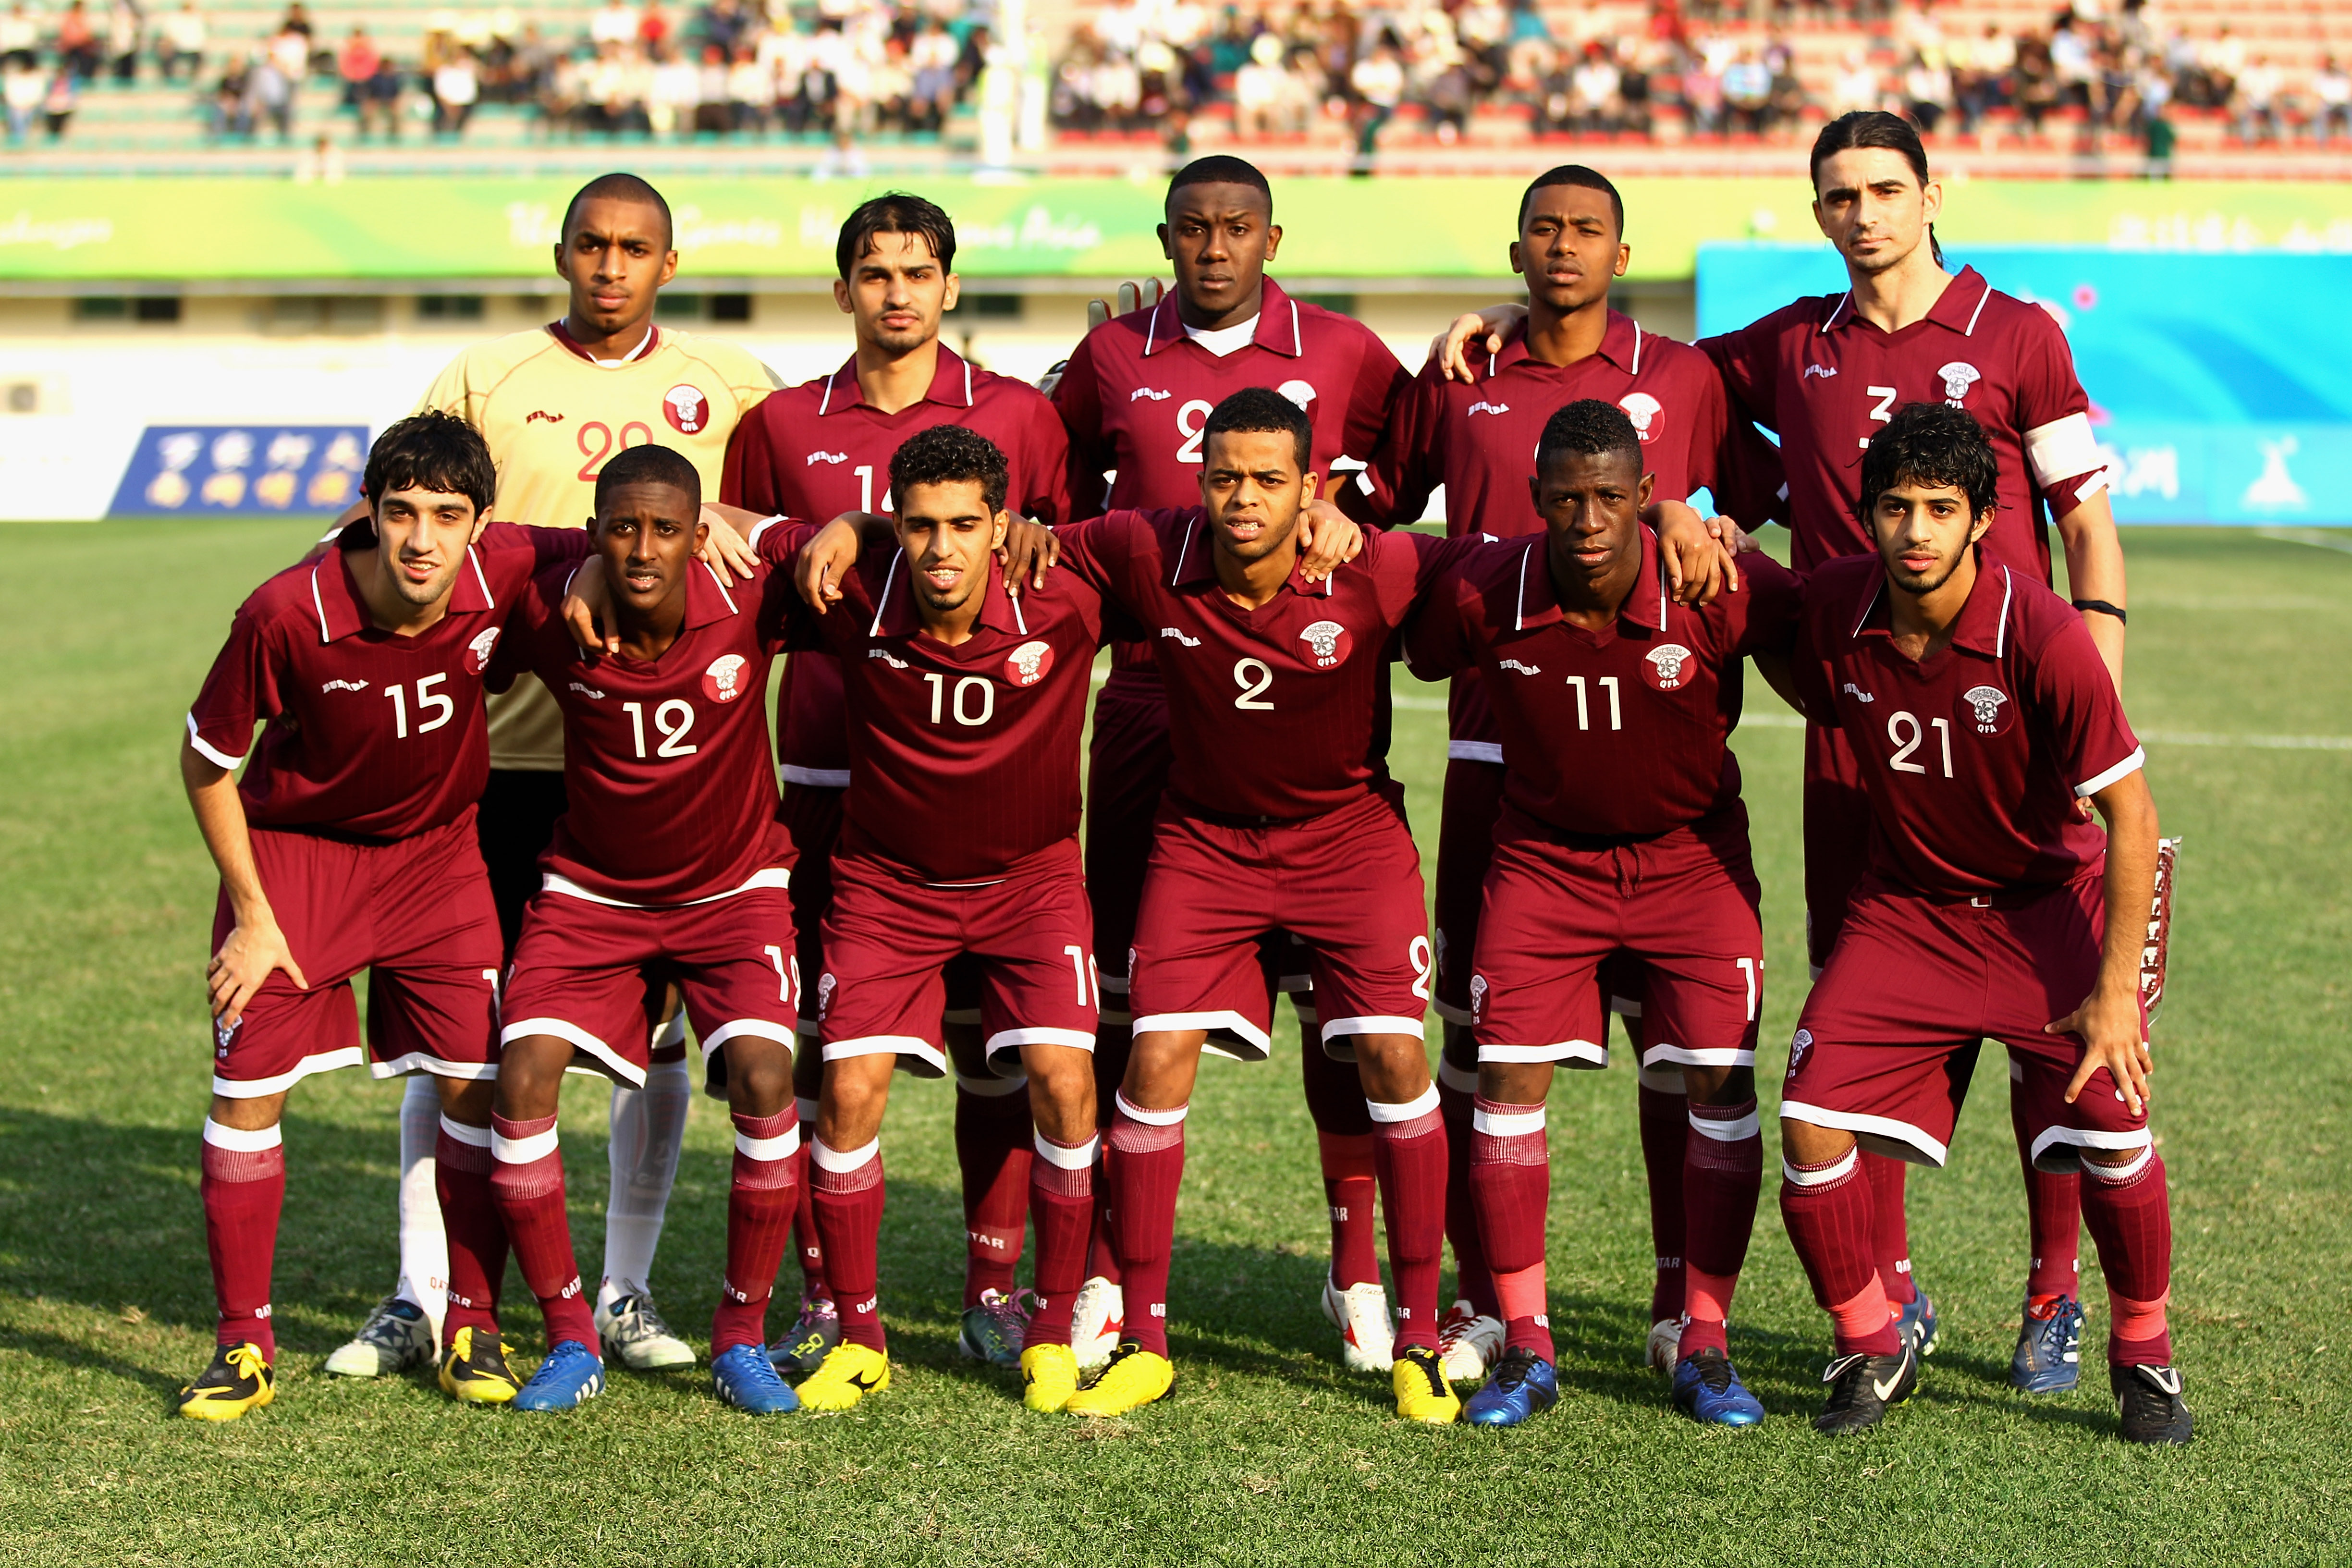 GUANGZHOU, CHINA - NOVEMBER 09:  The Qatar team pose for the cameras prior to kickoff during the Men's Football group D pool match between Qatar and India ahead of the 16th Asian Games Guangzhou 2010 at Huadu Stadium on November 9, 2010 in Guangzhou, Chin